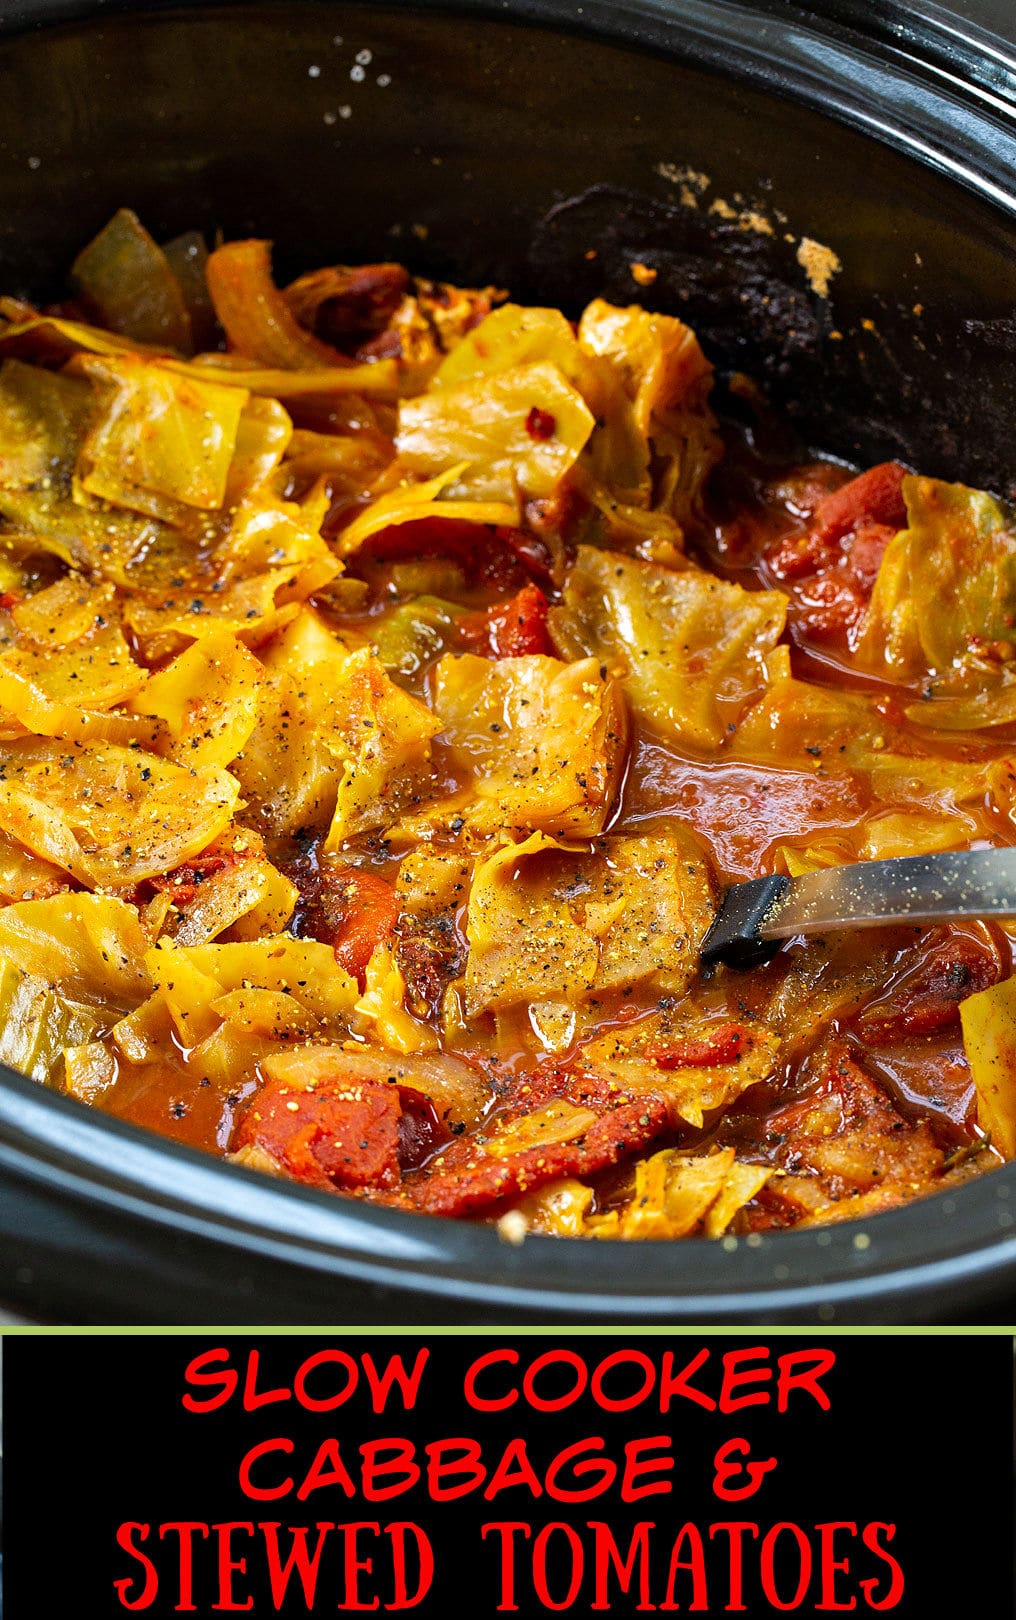 Cabbage and Stewed Tomatoes in a slow cooker.